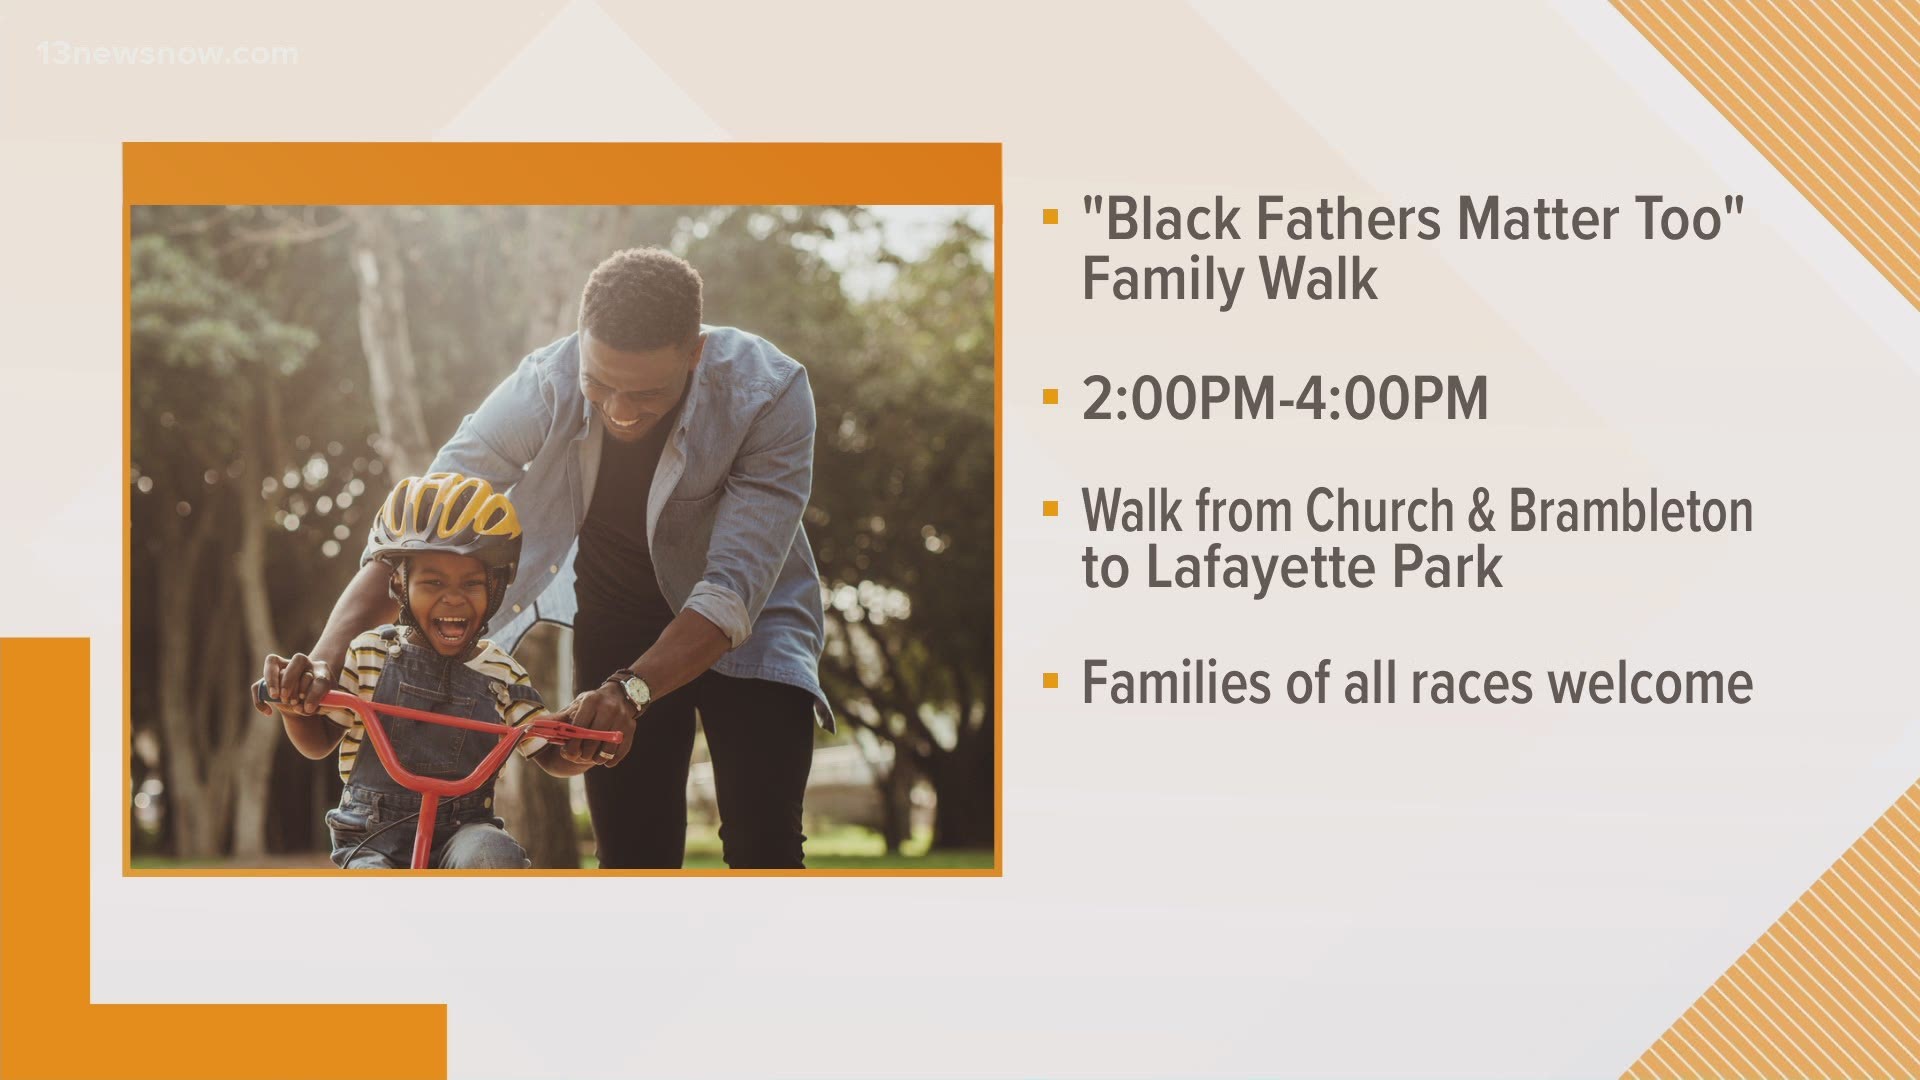 The walk in Norfolk is meant to uplift Black families and fight stereotypes.